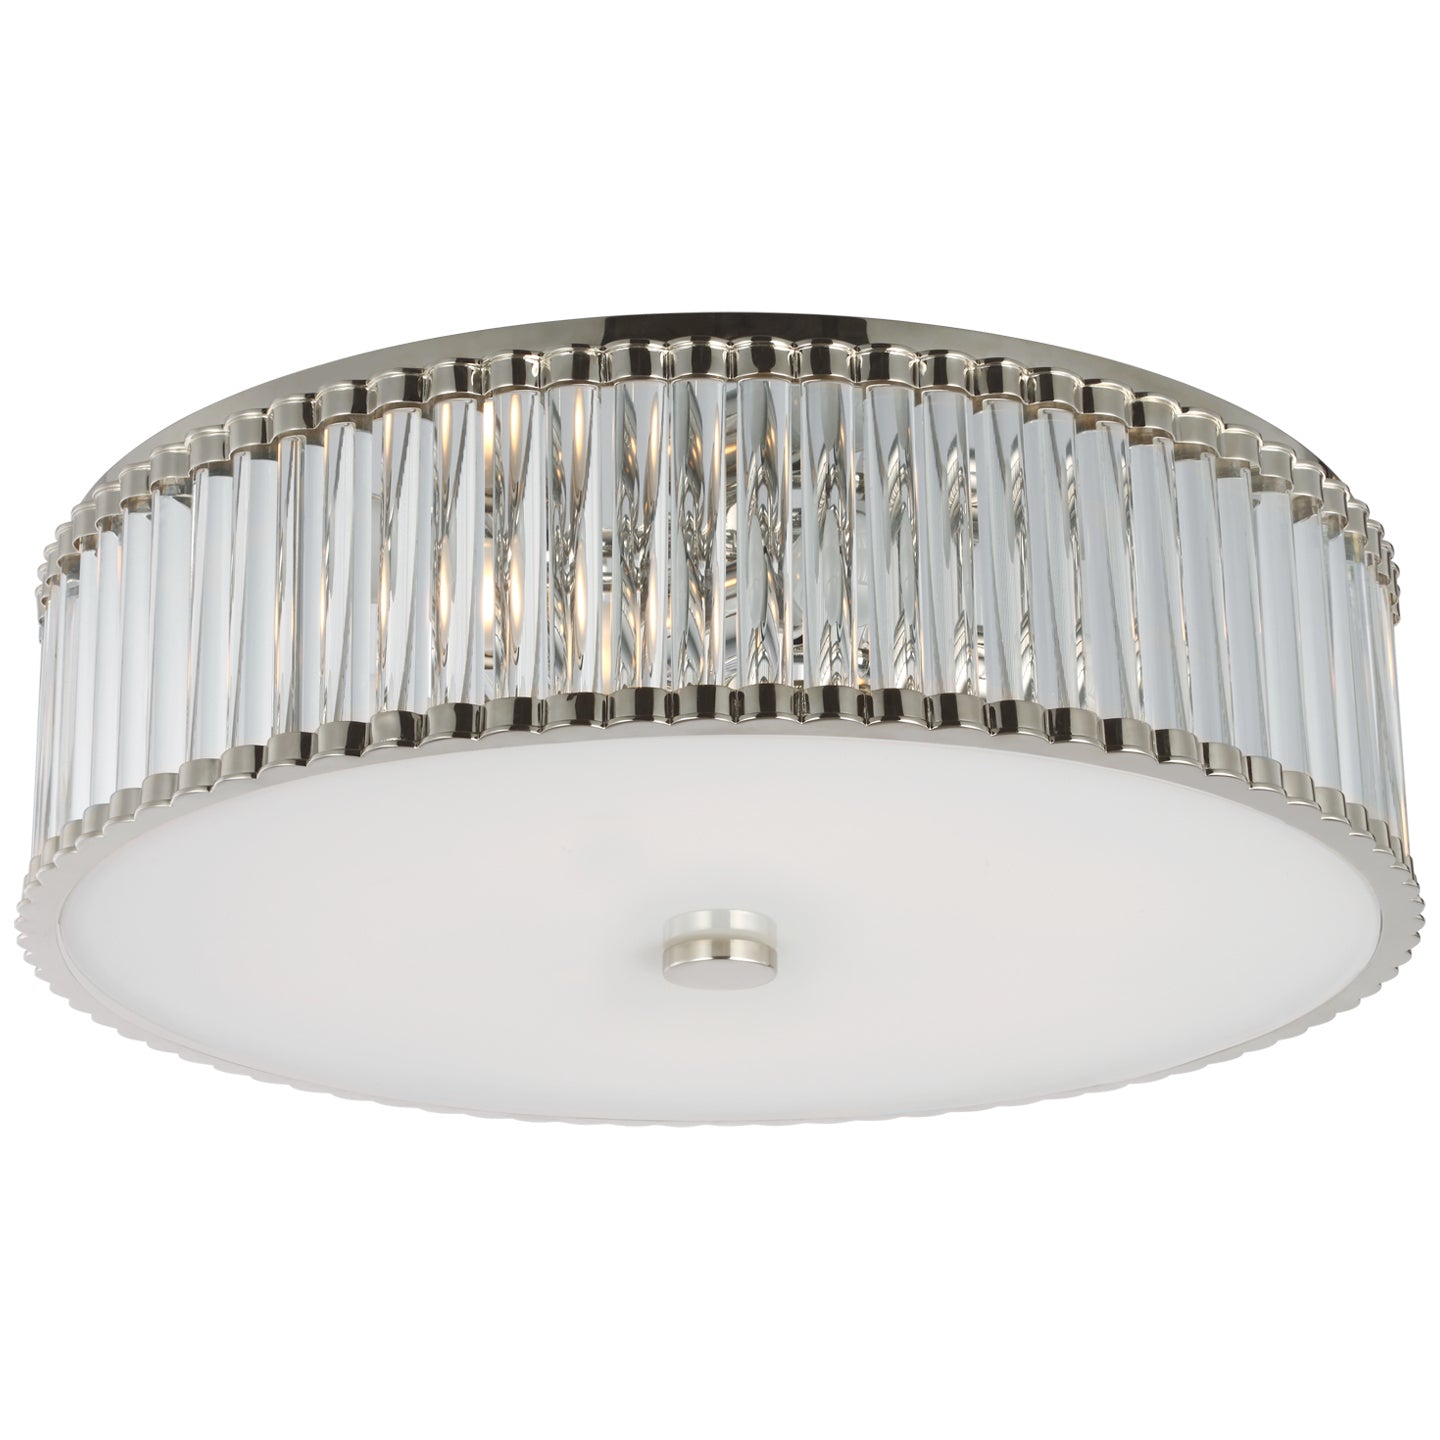 Load image into Gallery viewer, Visual Comfort Signature - CHC 4927PN-CG - LED Flush Mount - Kean - Polished Nickel
